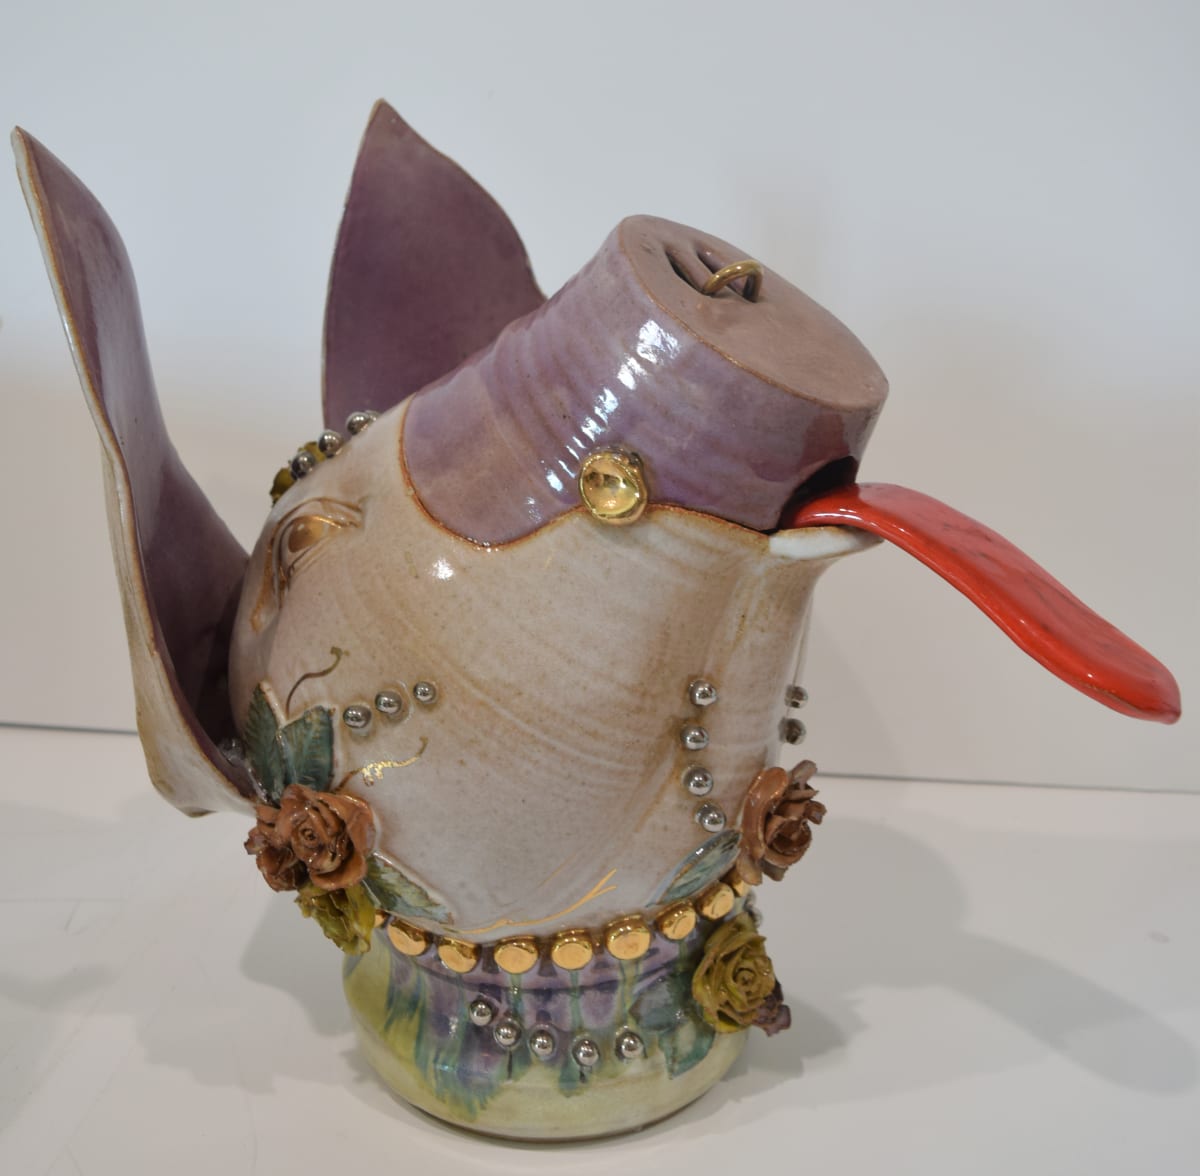 Pig Tureen with ladle by John Heller 